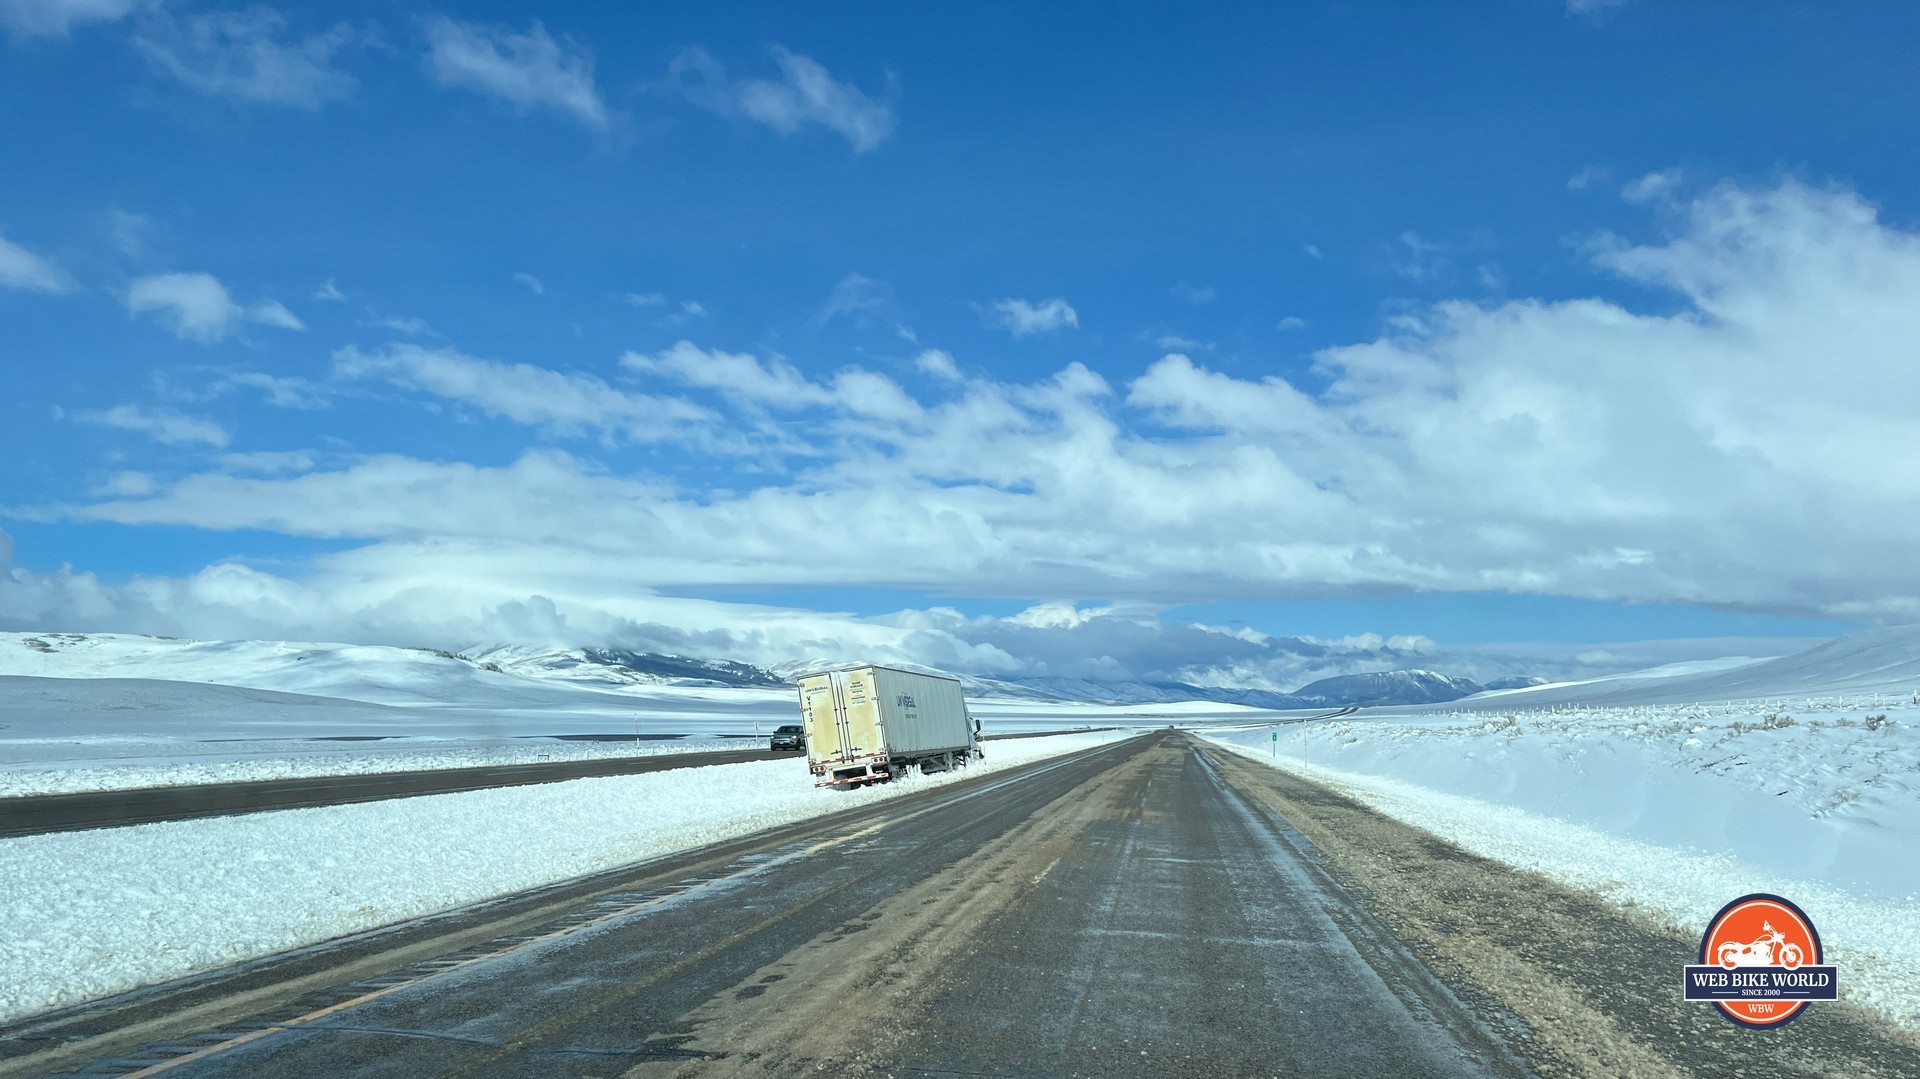 A snowstorm we encountered on the highway in Montana was a surprise in April.